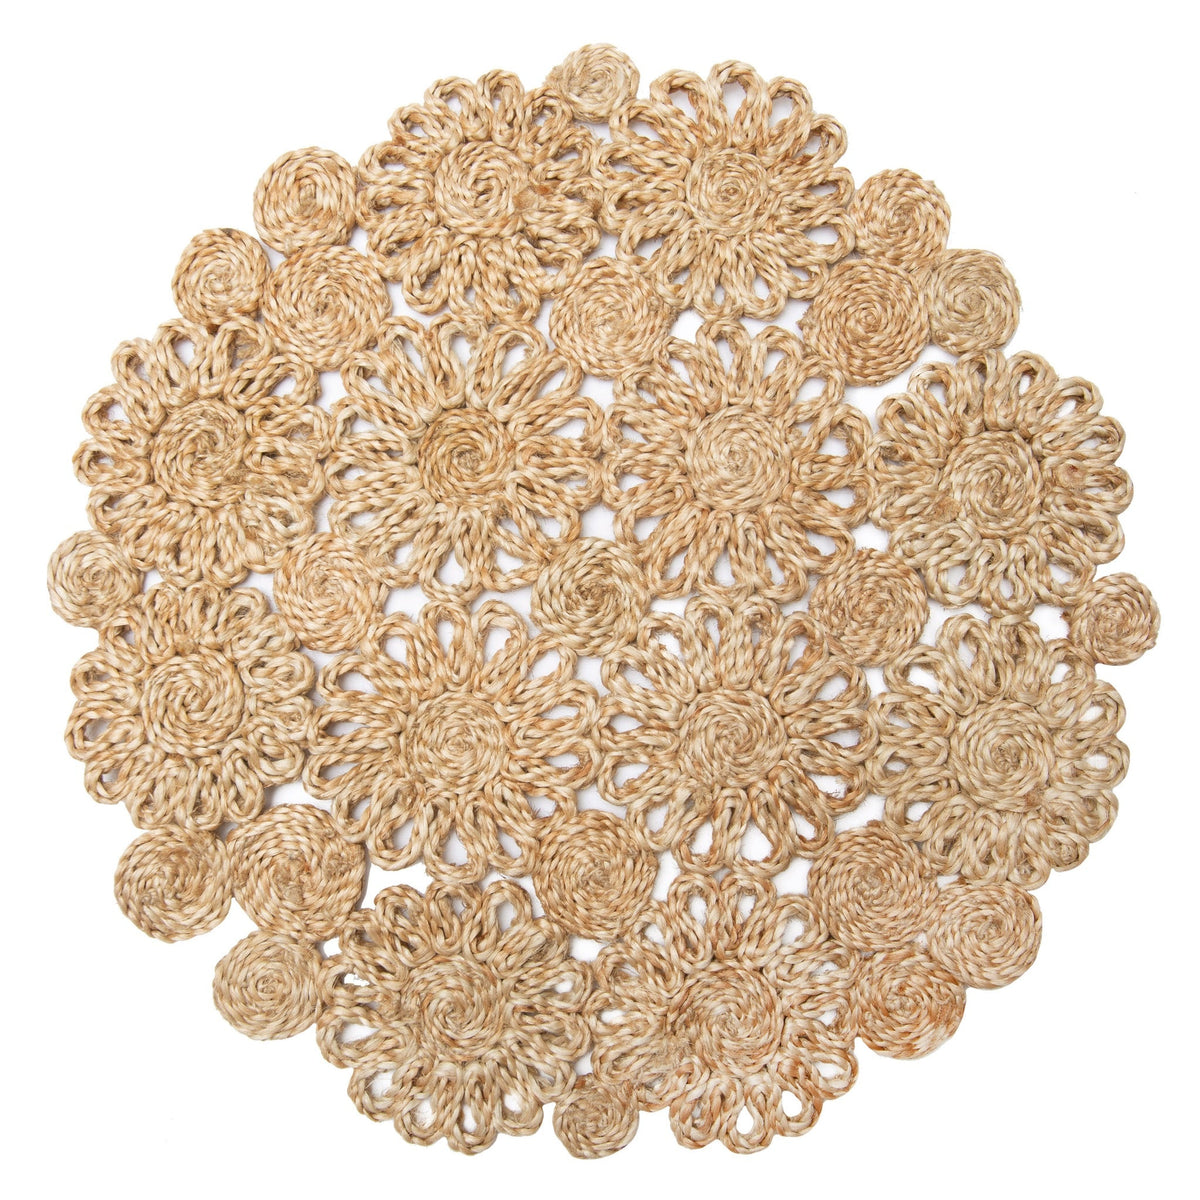 Daisy Jute 15" Round Placemat in Natural, Set of 4